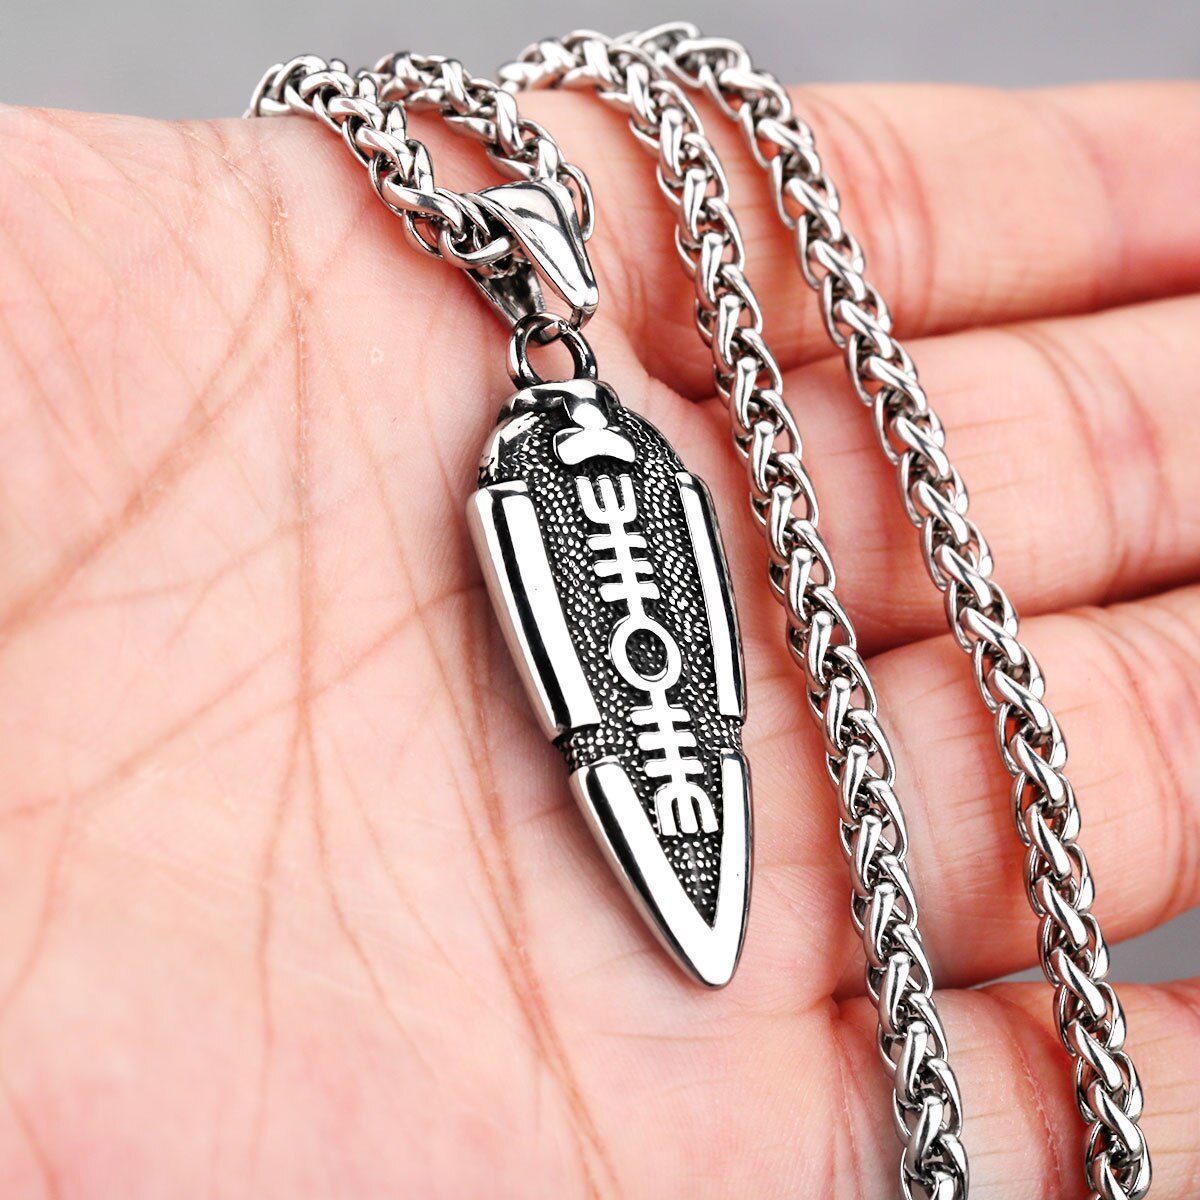 Stainless Steel Viking Spear Necklace Odin Rune